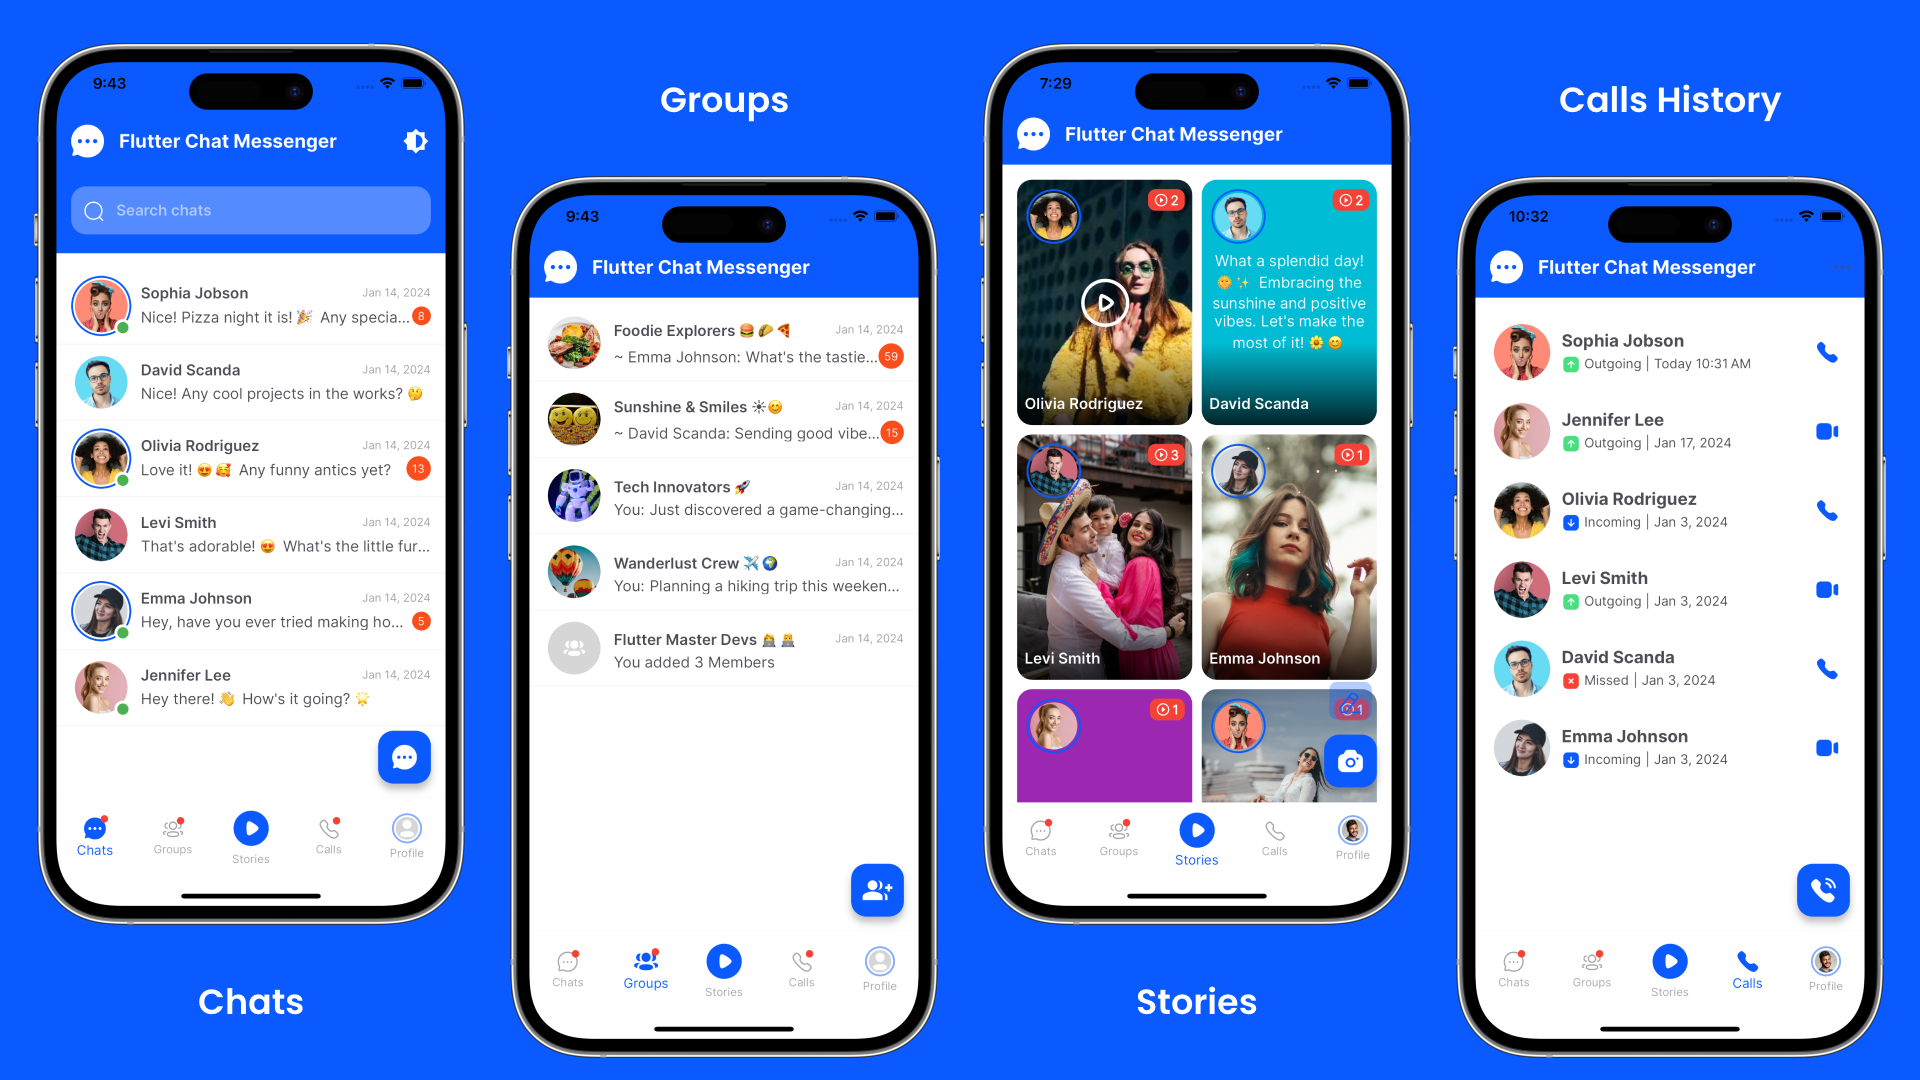 Chats list, Groups/Broadcasts, Stories & Calls History features